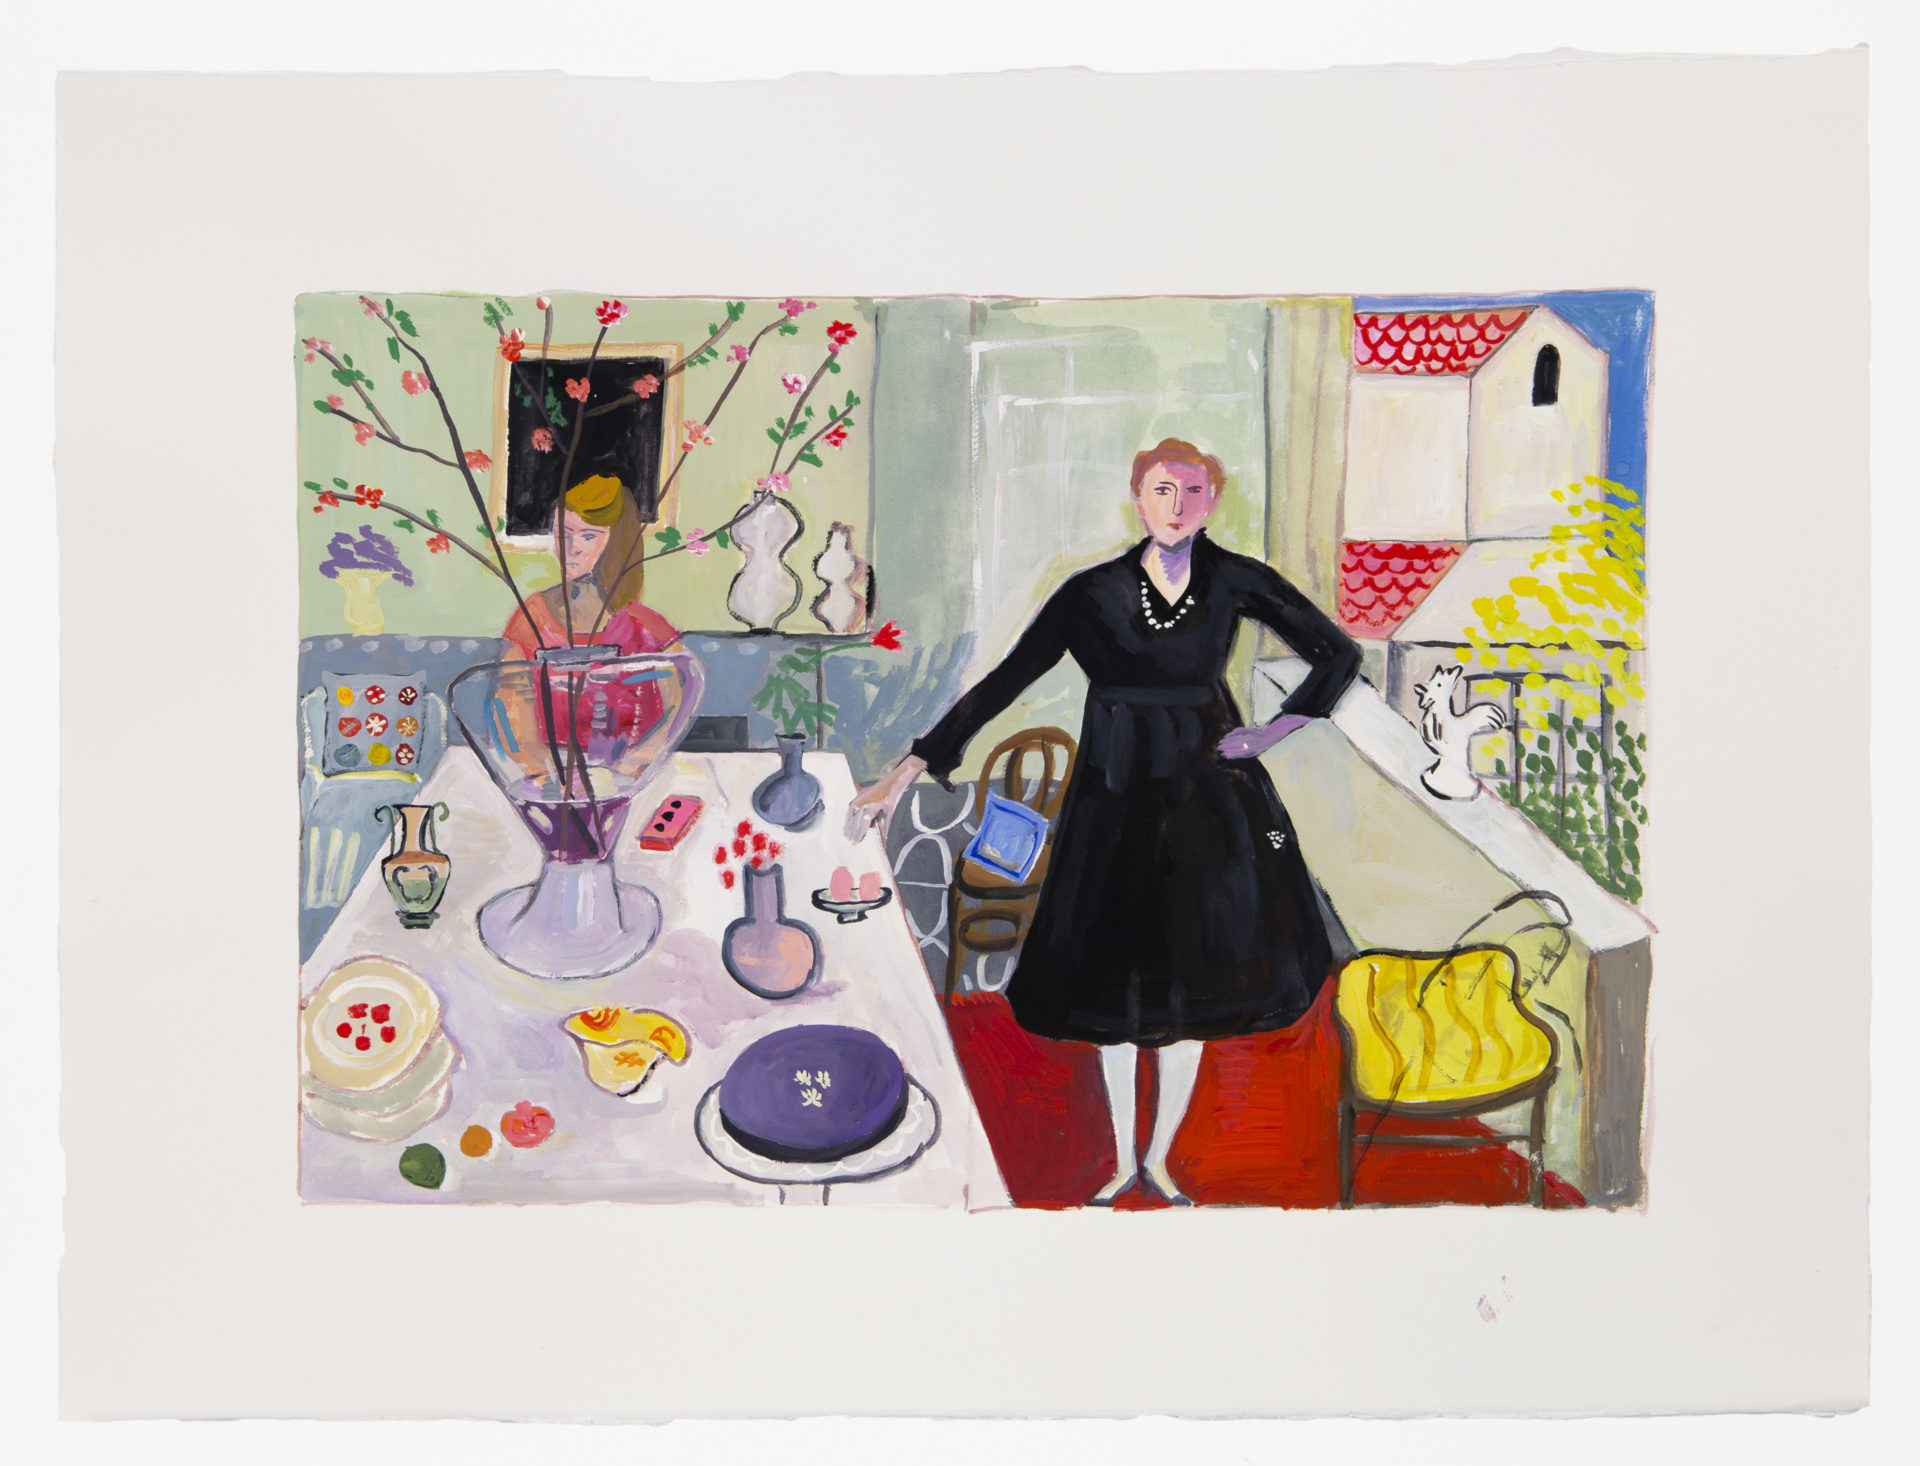 Maira Kalman Woman With Hand on Hip, 2022 Gouache Image Dimensions: 9 3/4 x 14 1/4 inches (24.8 x 36.2 cm) Paper Dimensions: 14 x 19 inches (35.6 x 48.3 cm)